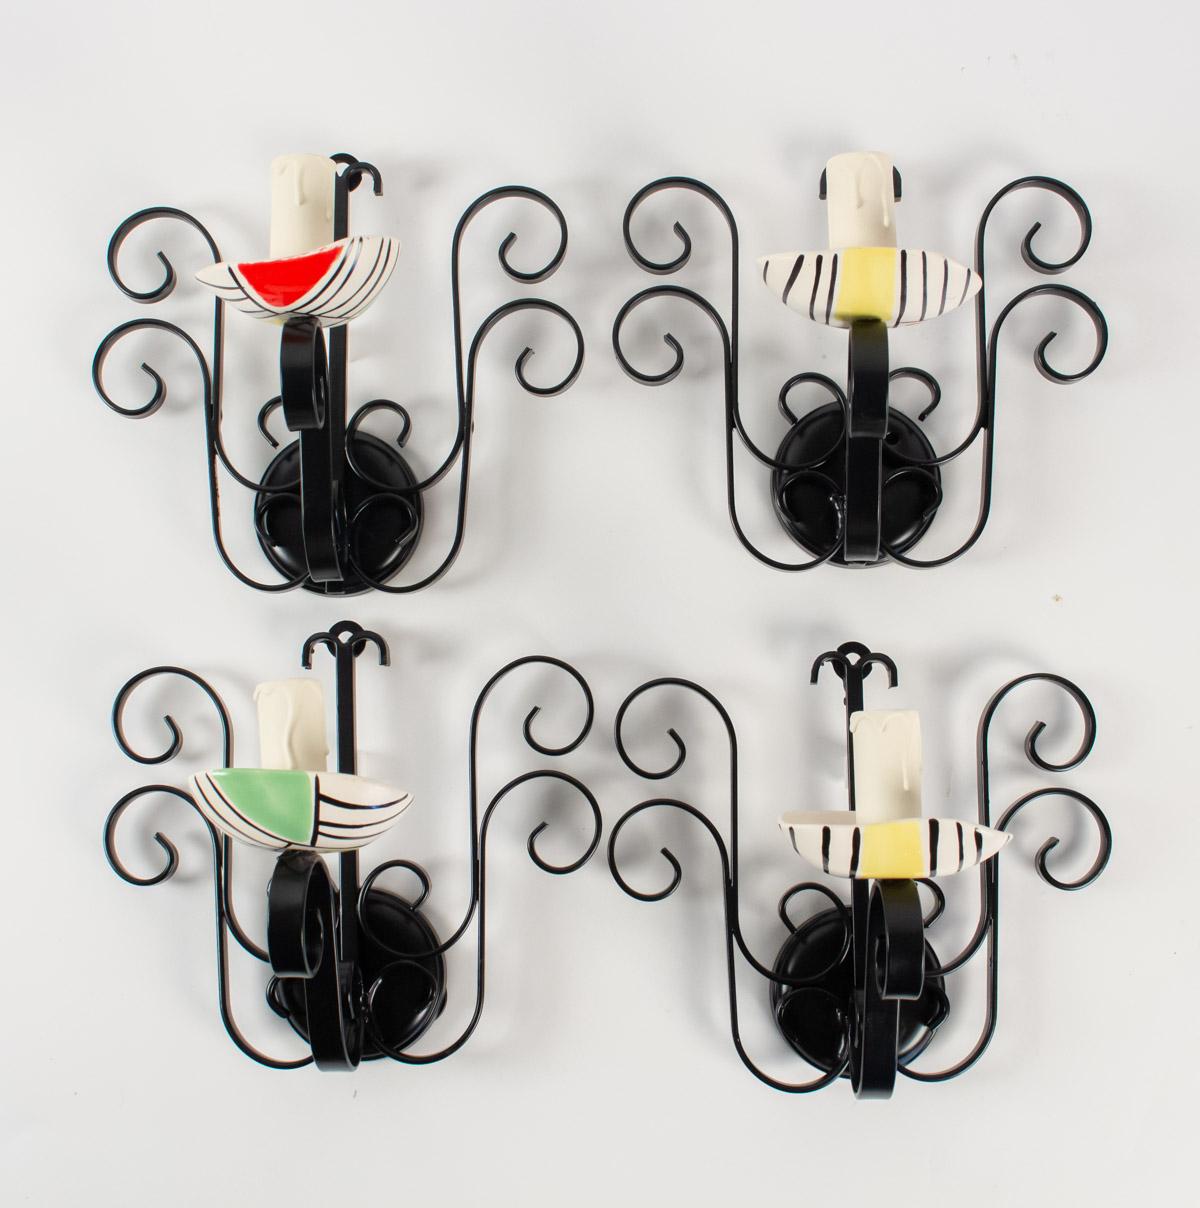 The back plates are made of black lacquered wrought iron. Each sconces are highlighted with ceramics cups. These white ceramics cups are hand painted with yellow, red, green and black touches.
Stylish art work typical of 1950s Vallauris